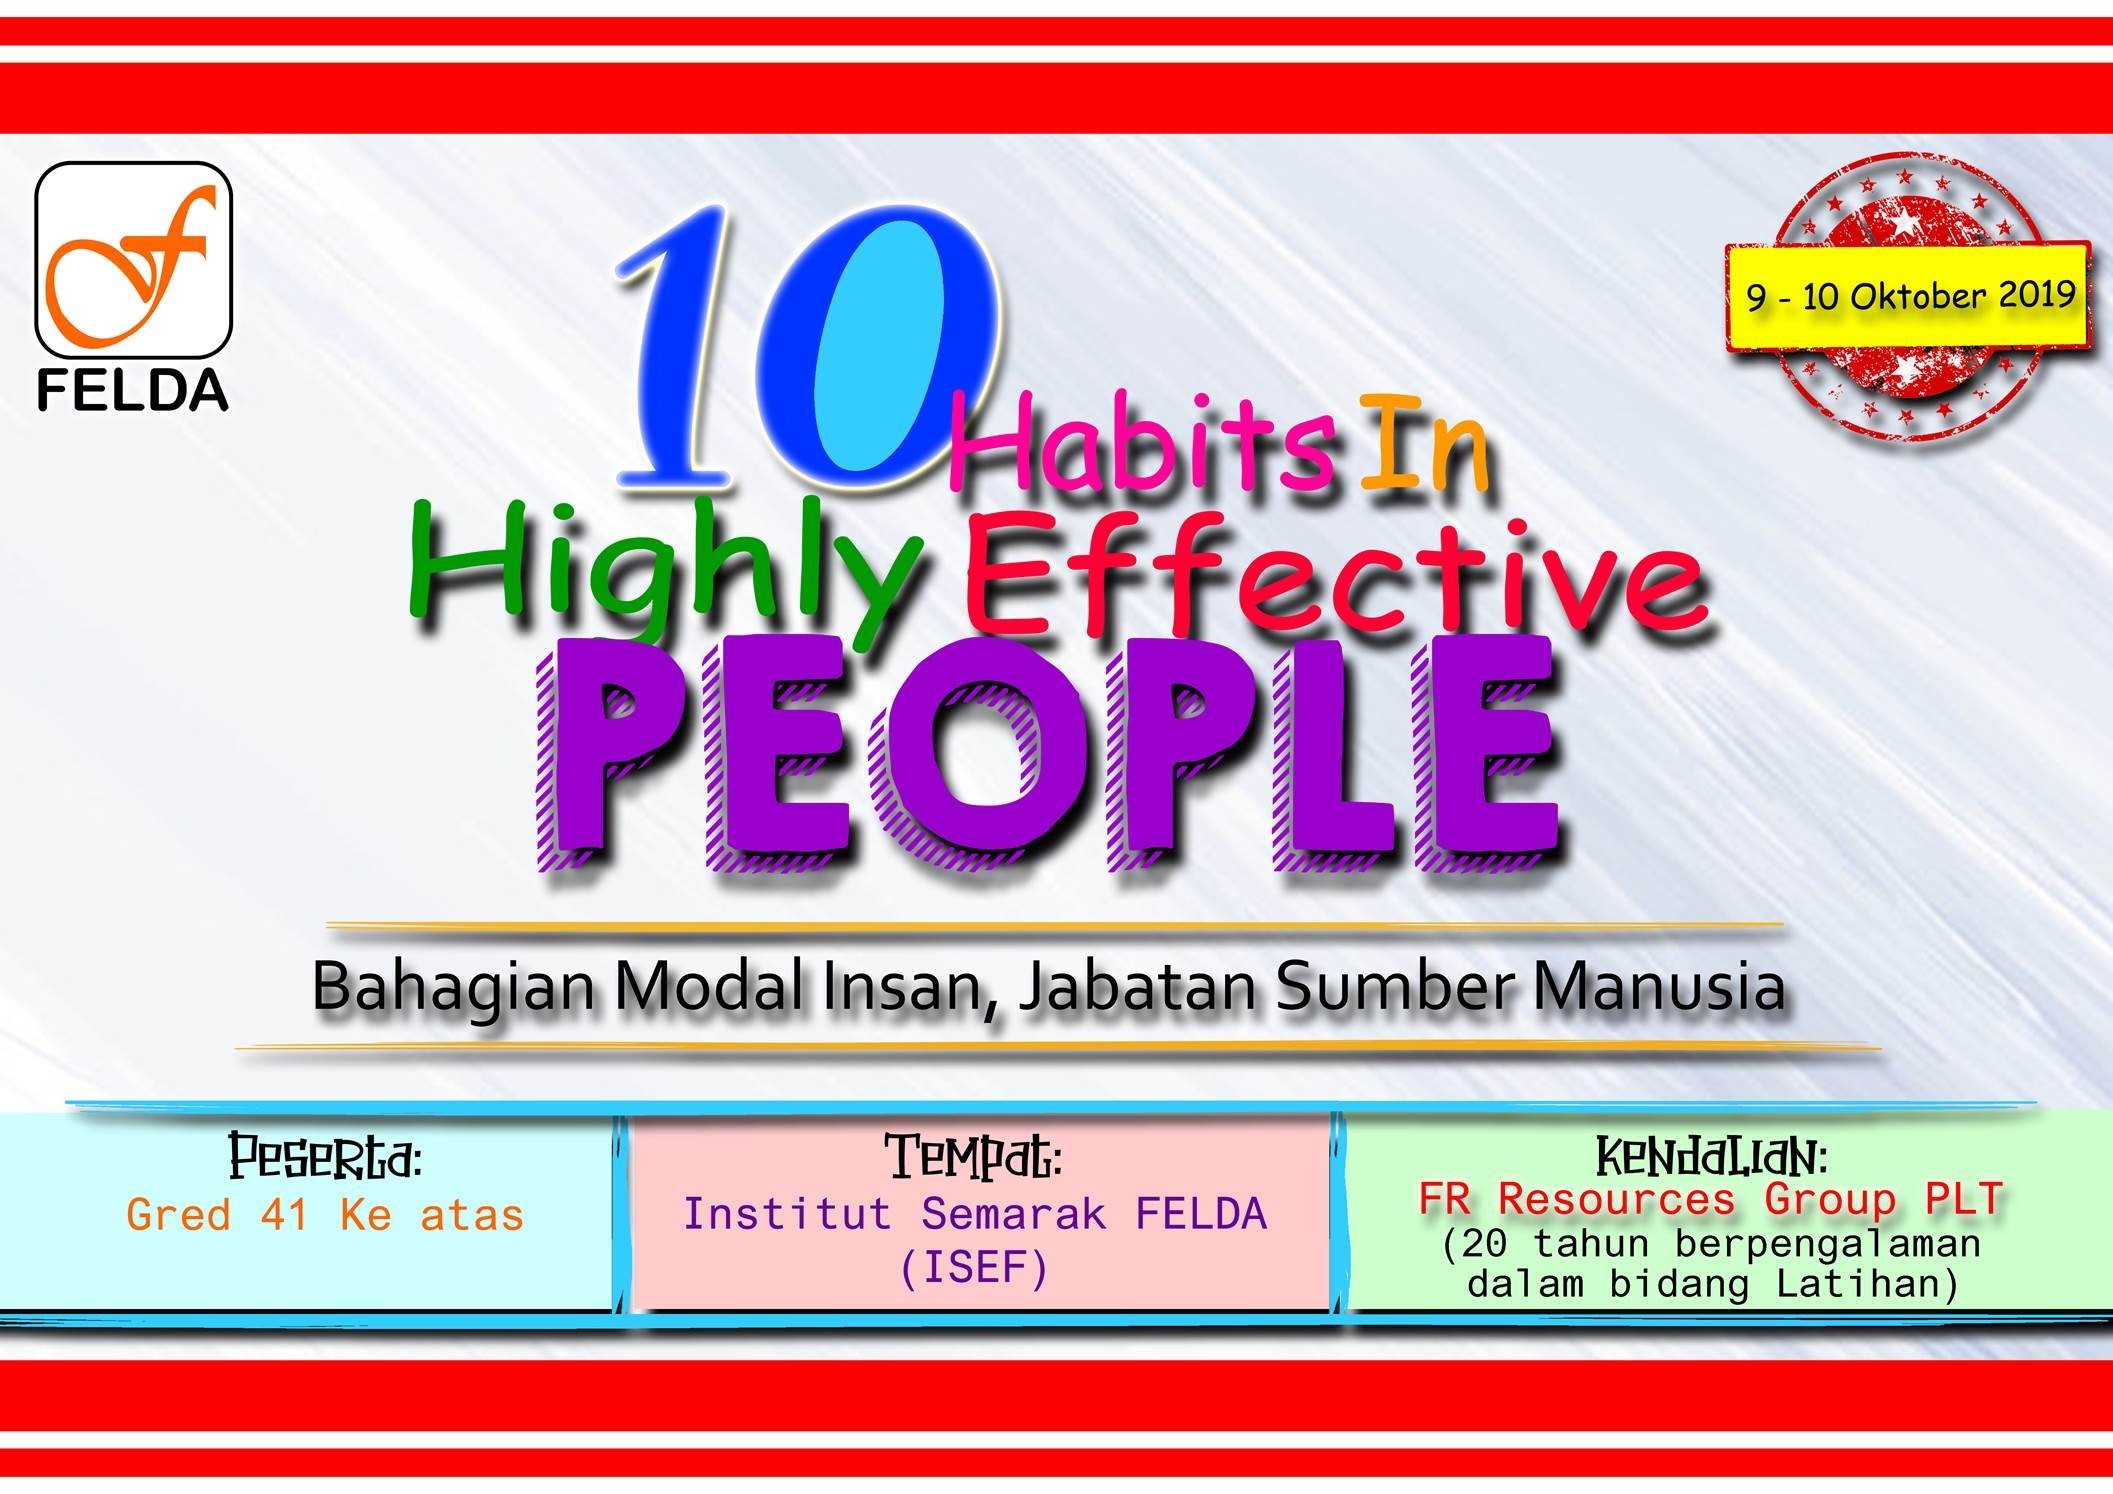 10 habits in highly effective people